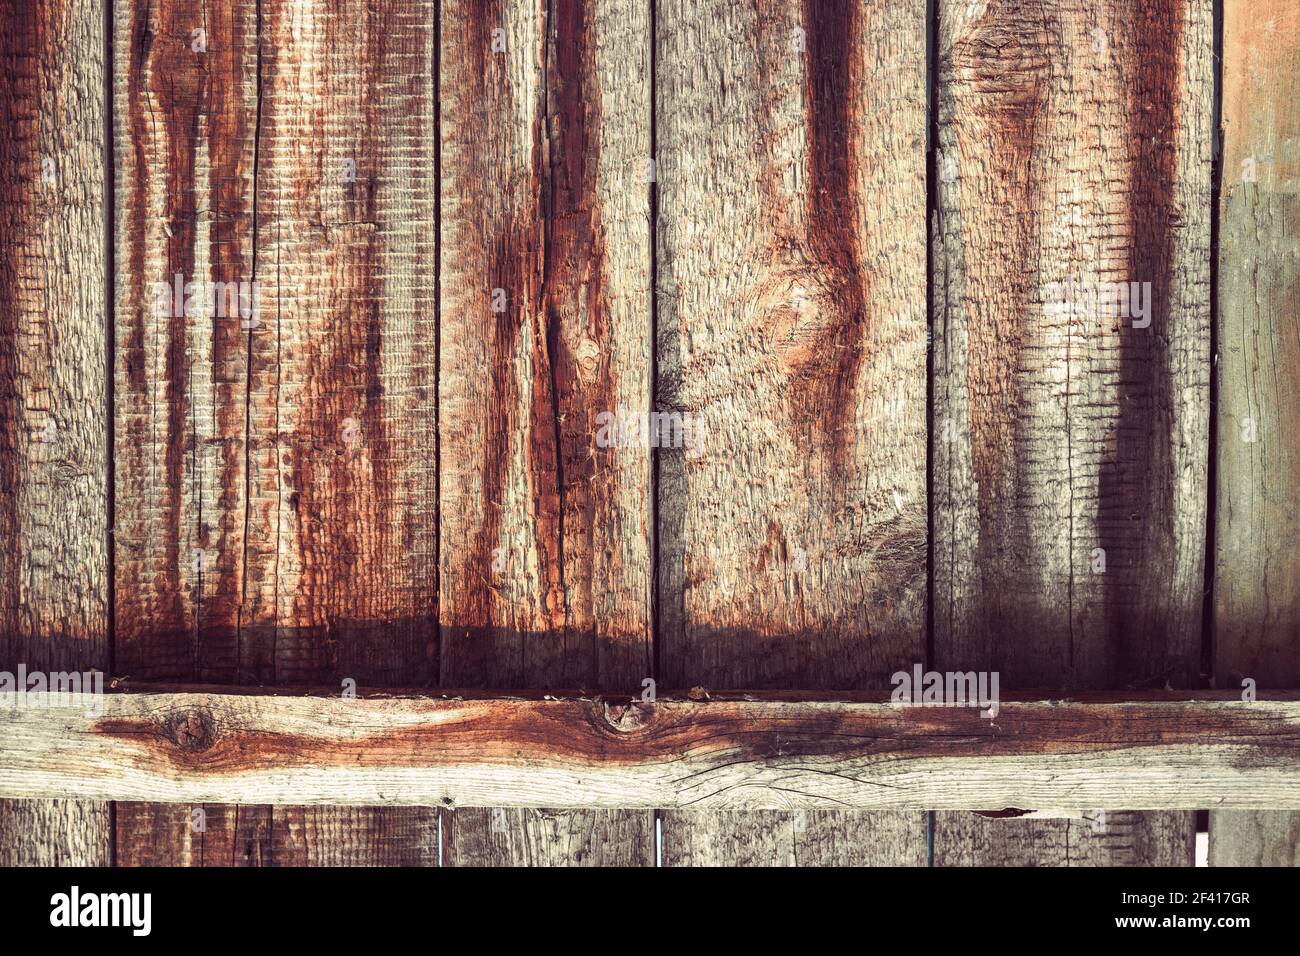 Grunge Wood Panels Gor Background. Vintage old wooden planks background. Old wood wall texture background.. Grunge Wood Panels For Background Purposes Stock Photo